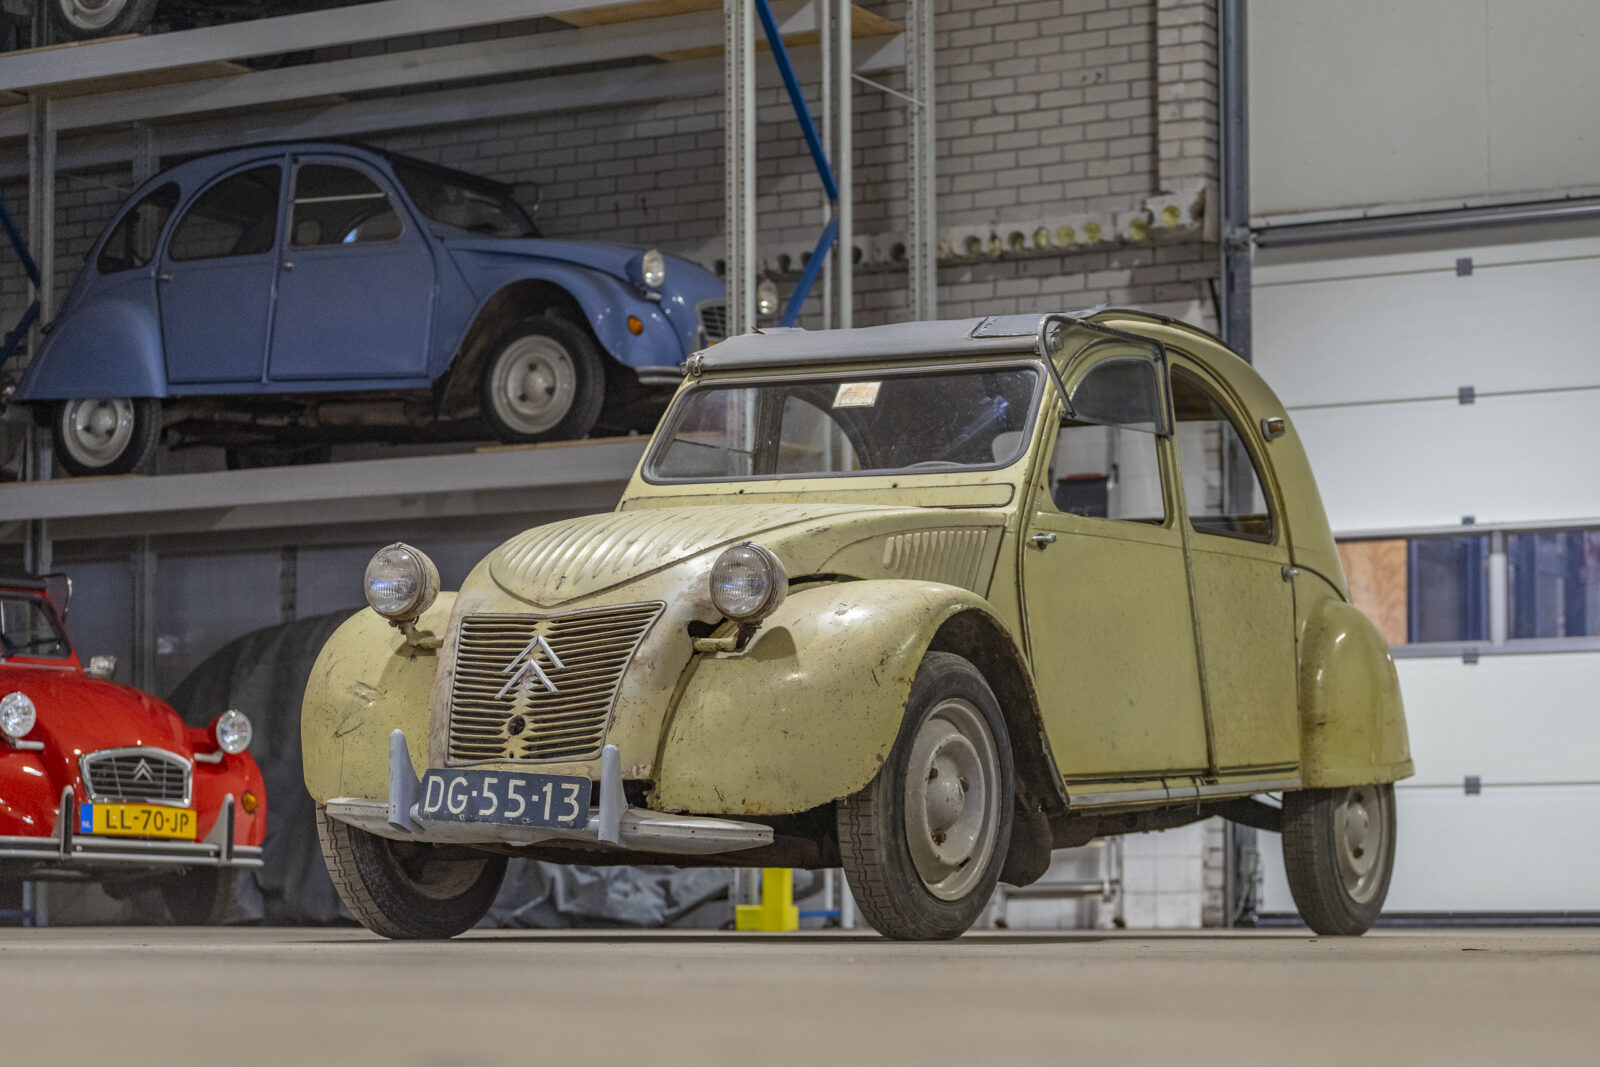 This low-mileage Citroën 2CV Sahara is the barn find of our dreams